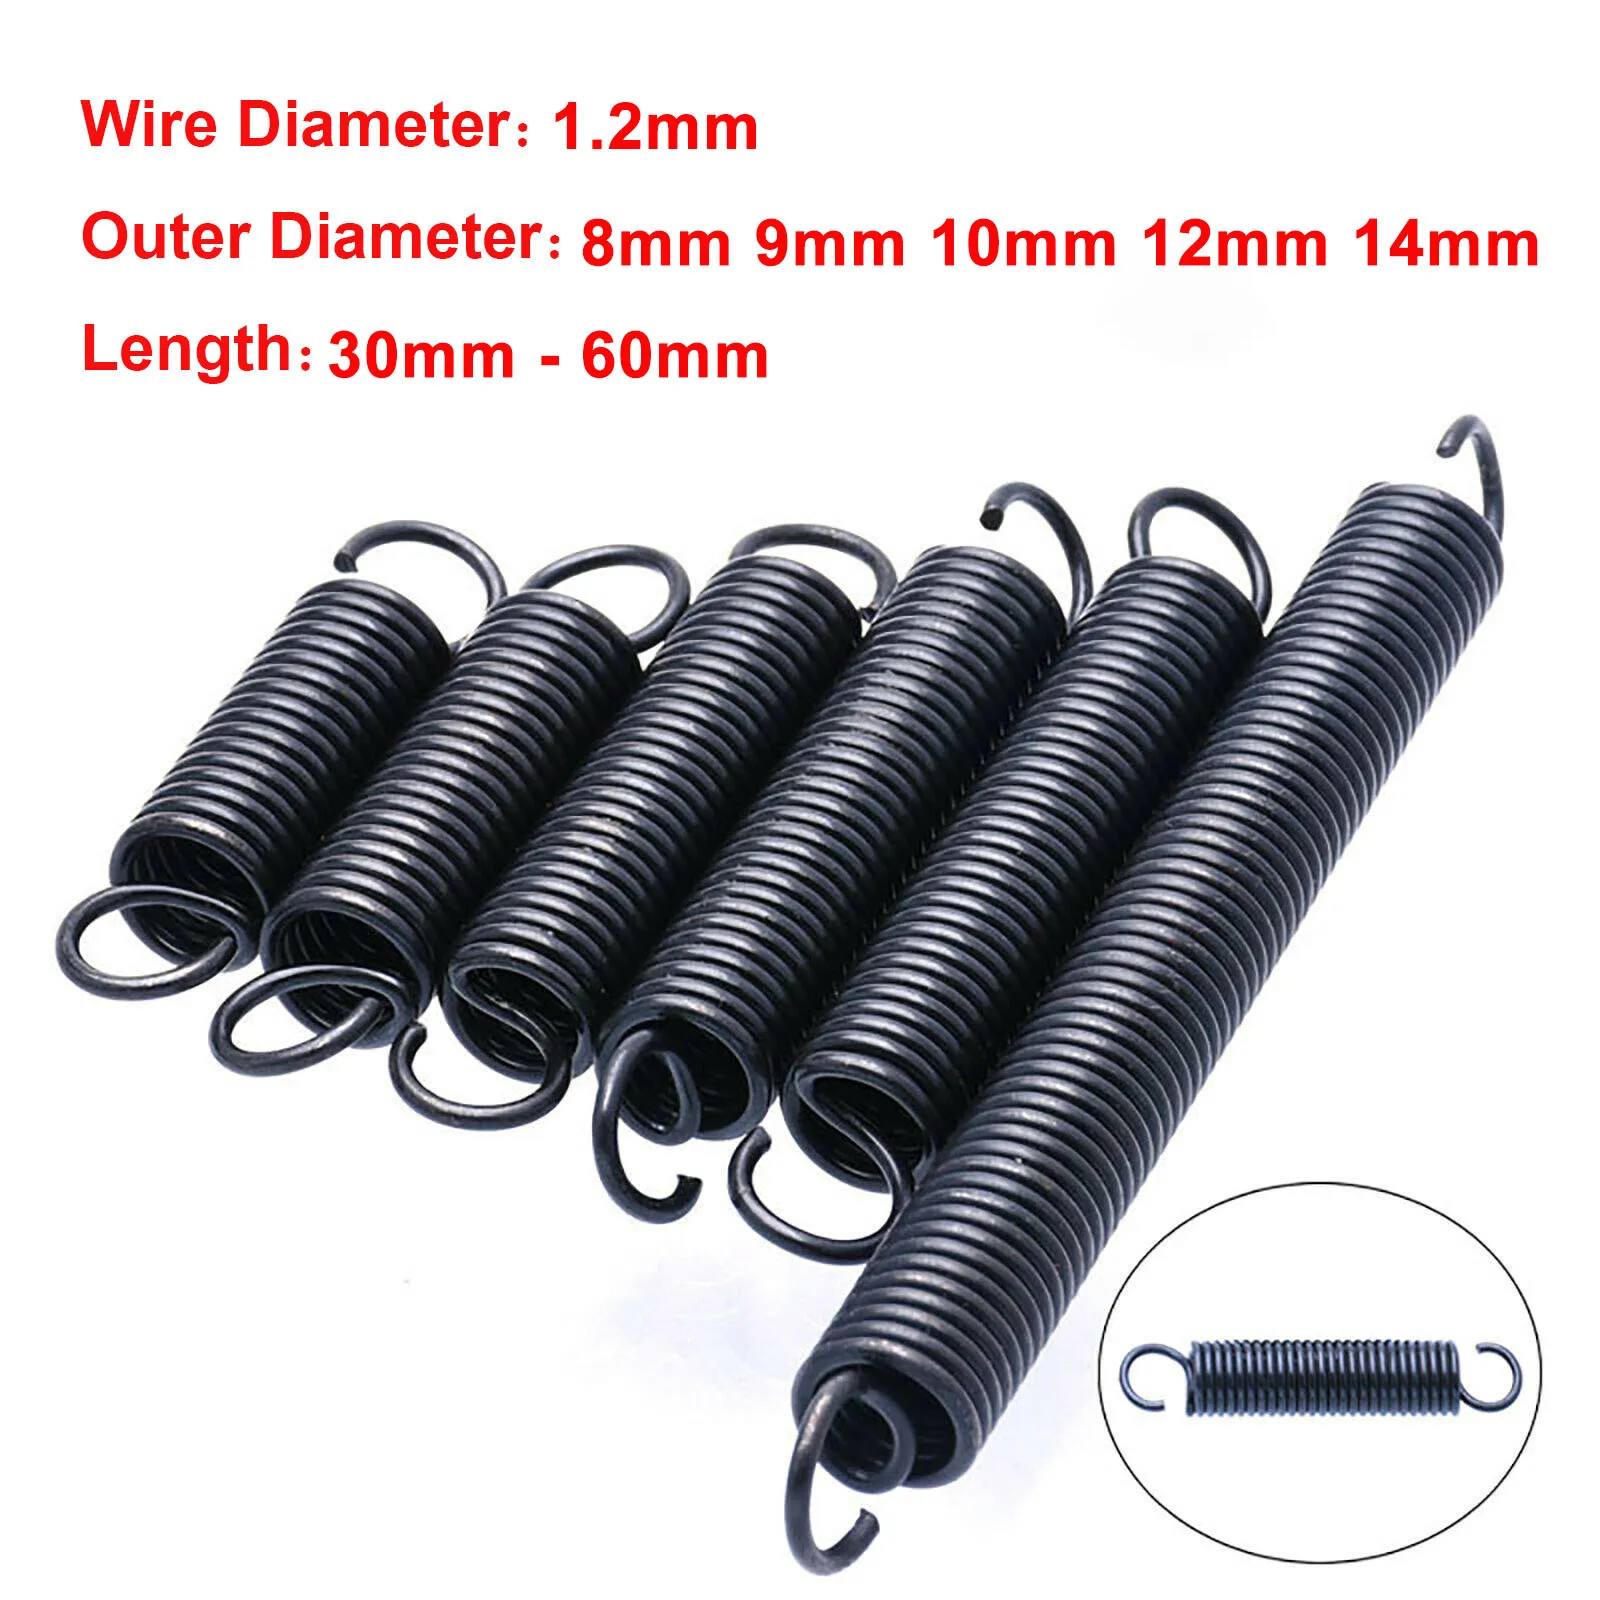 

5PCS Open Hook Tension Spring Wire Diameter 1.2mm Pullback Spring Coil Extension Spring Draught Spring OD 8/9/10/12mm